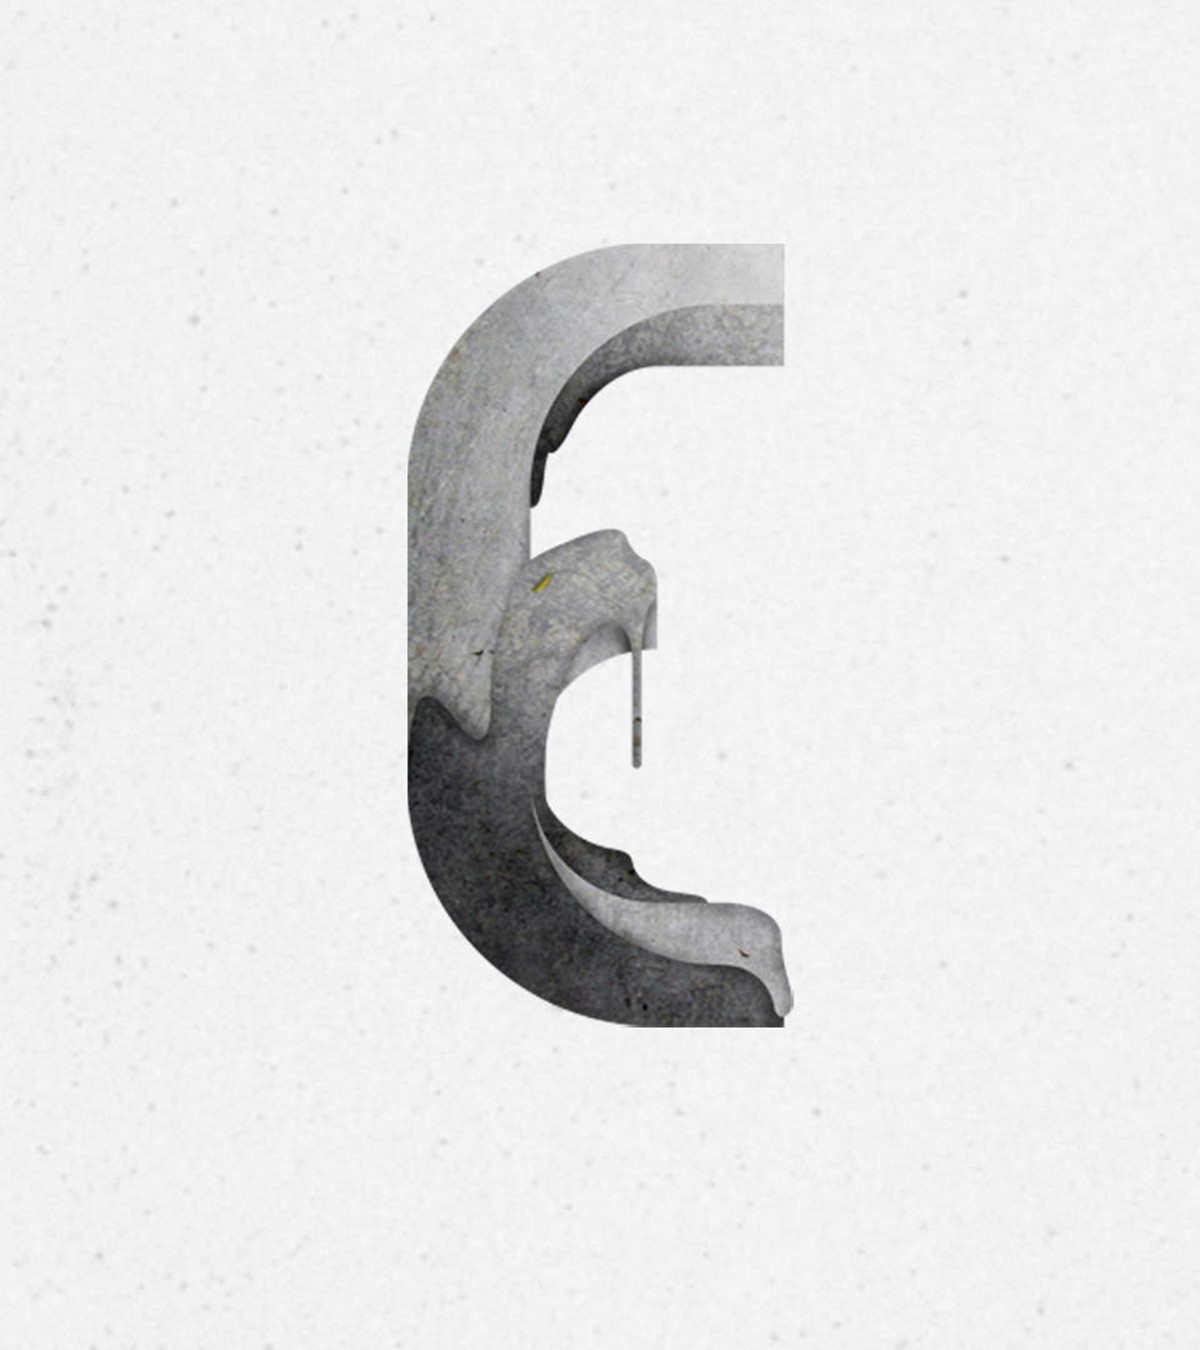 AIGA Quoted. Melting Dali letter E by Superfried design studio.